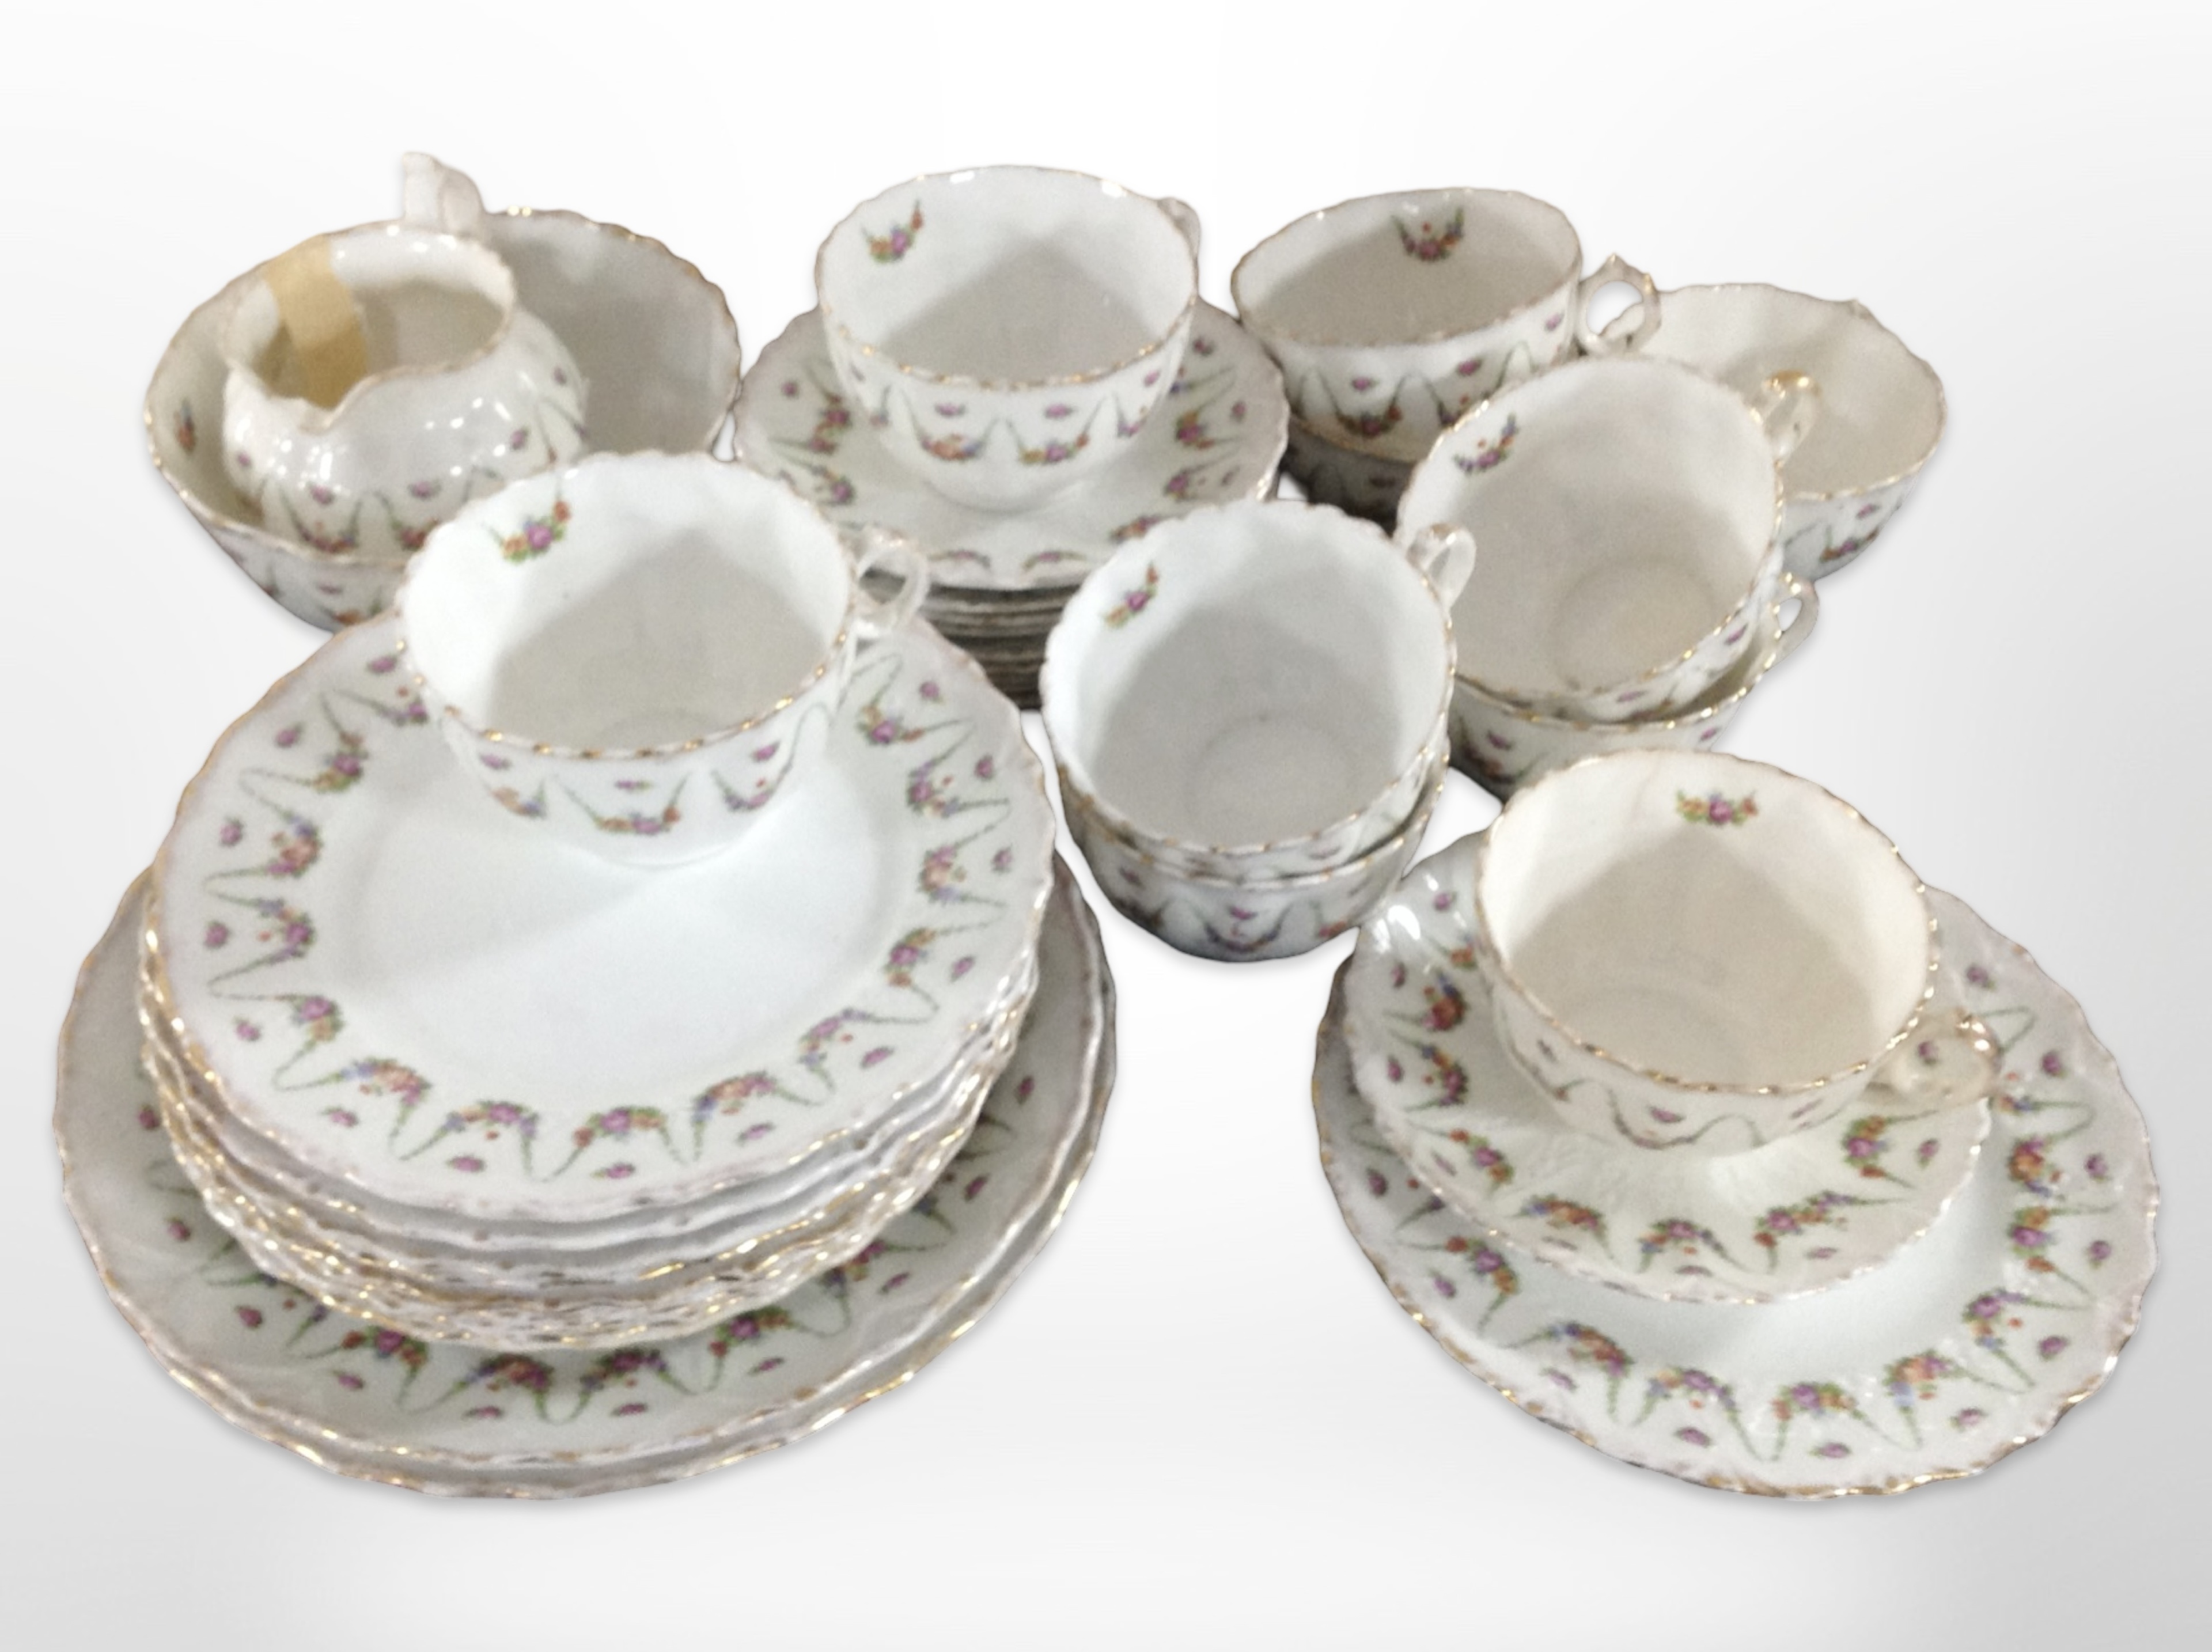 Approximately thirty six pieces of early 20th century English tea china decorated with floral